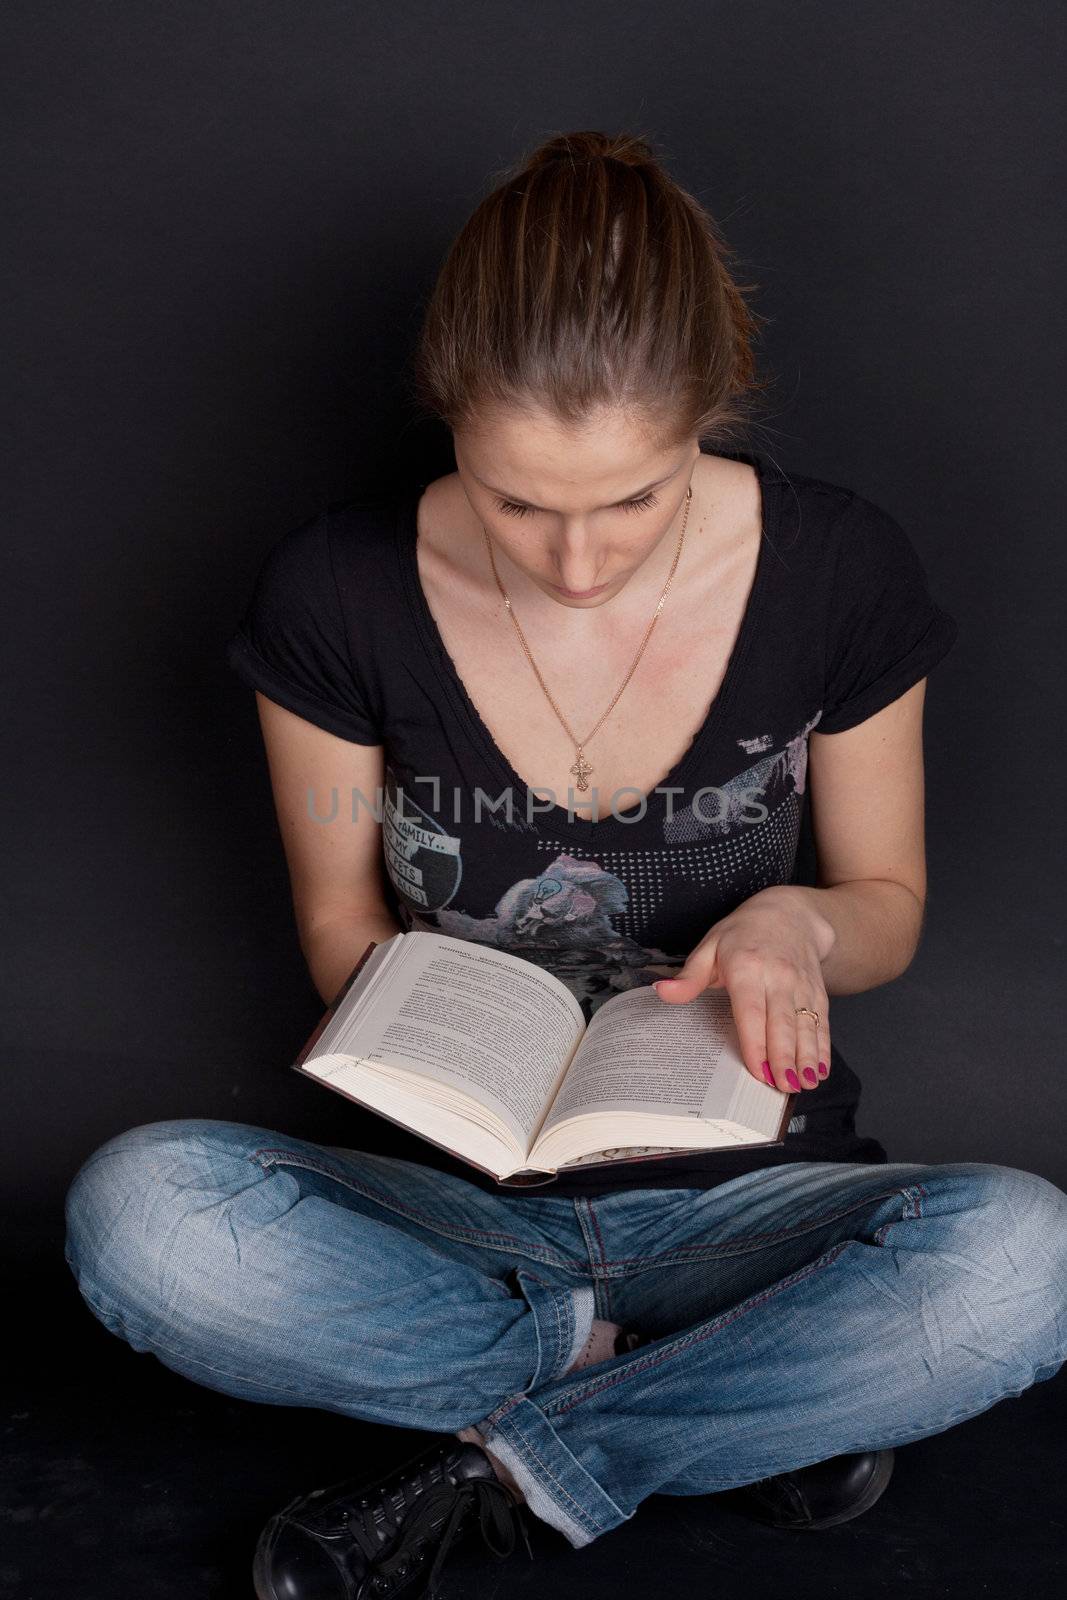 A girl sits and leafs through a book